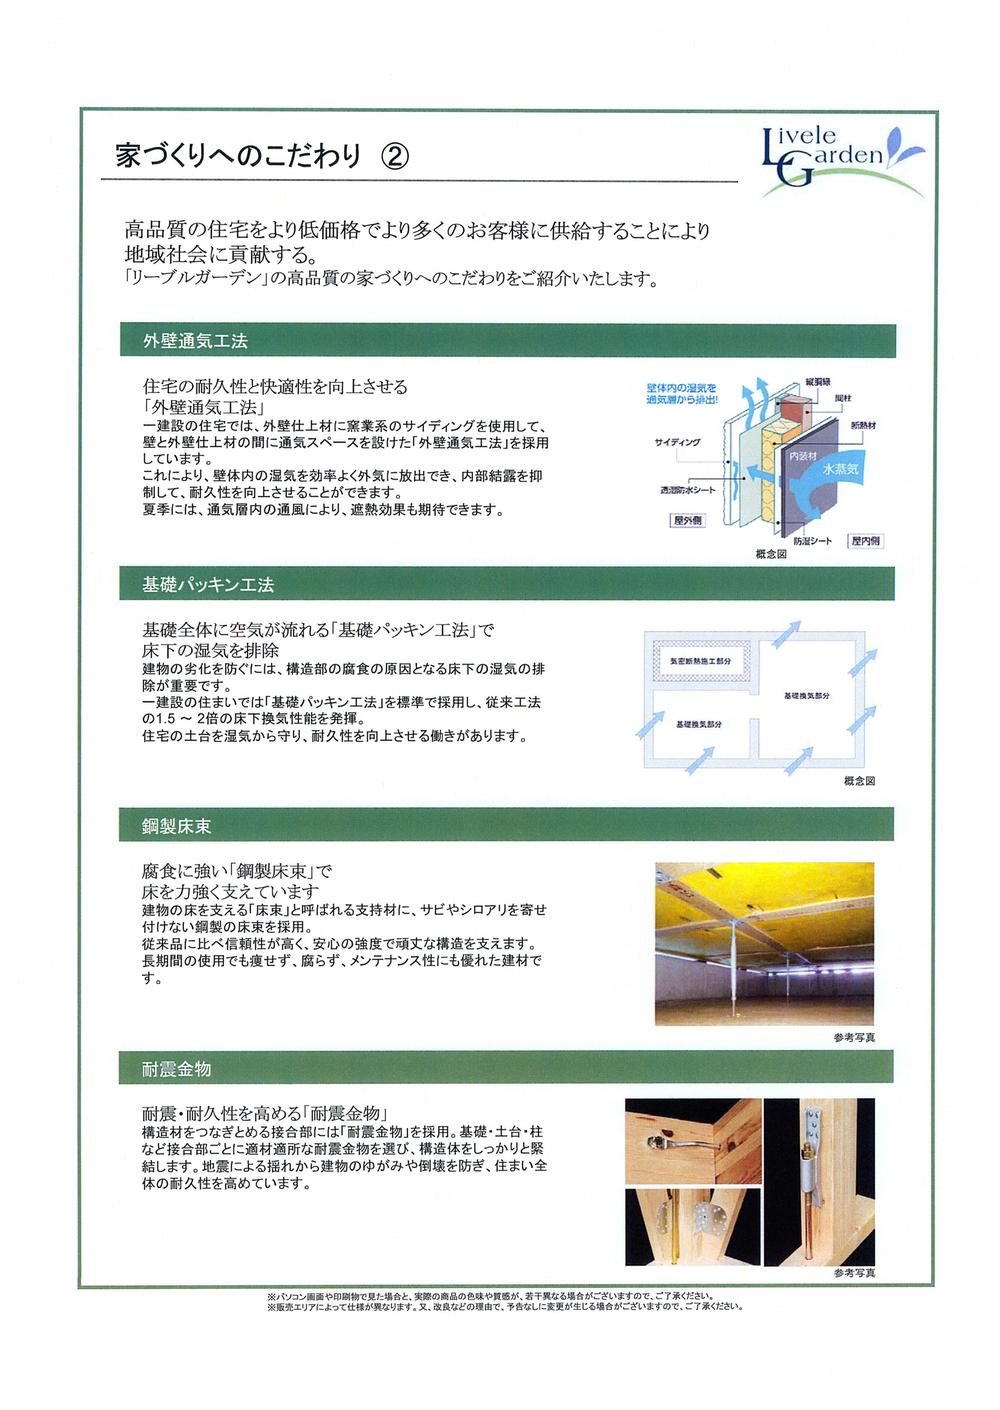 Construction ・ Construction method ・ specification. Seismic hardware to enhance the strong steel floor beams seismic durability to basic packing method corrosion in the entire outer wall ventilation method basis to improve the durability and comfort of residential air flows